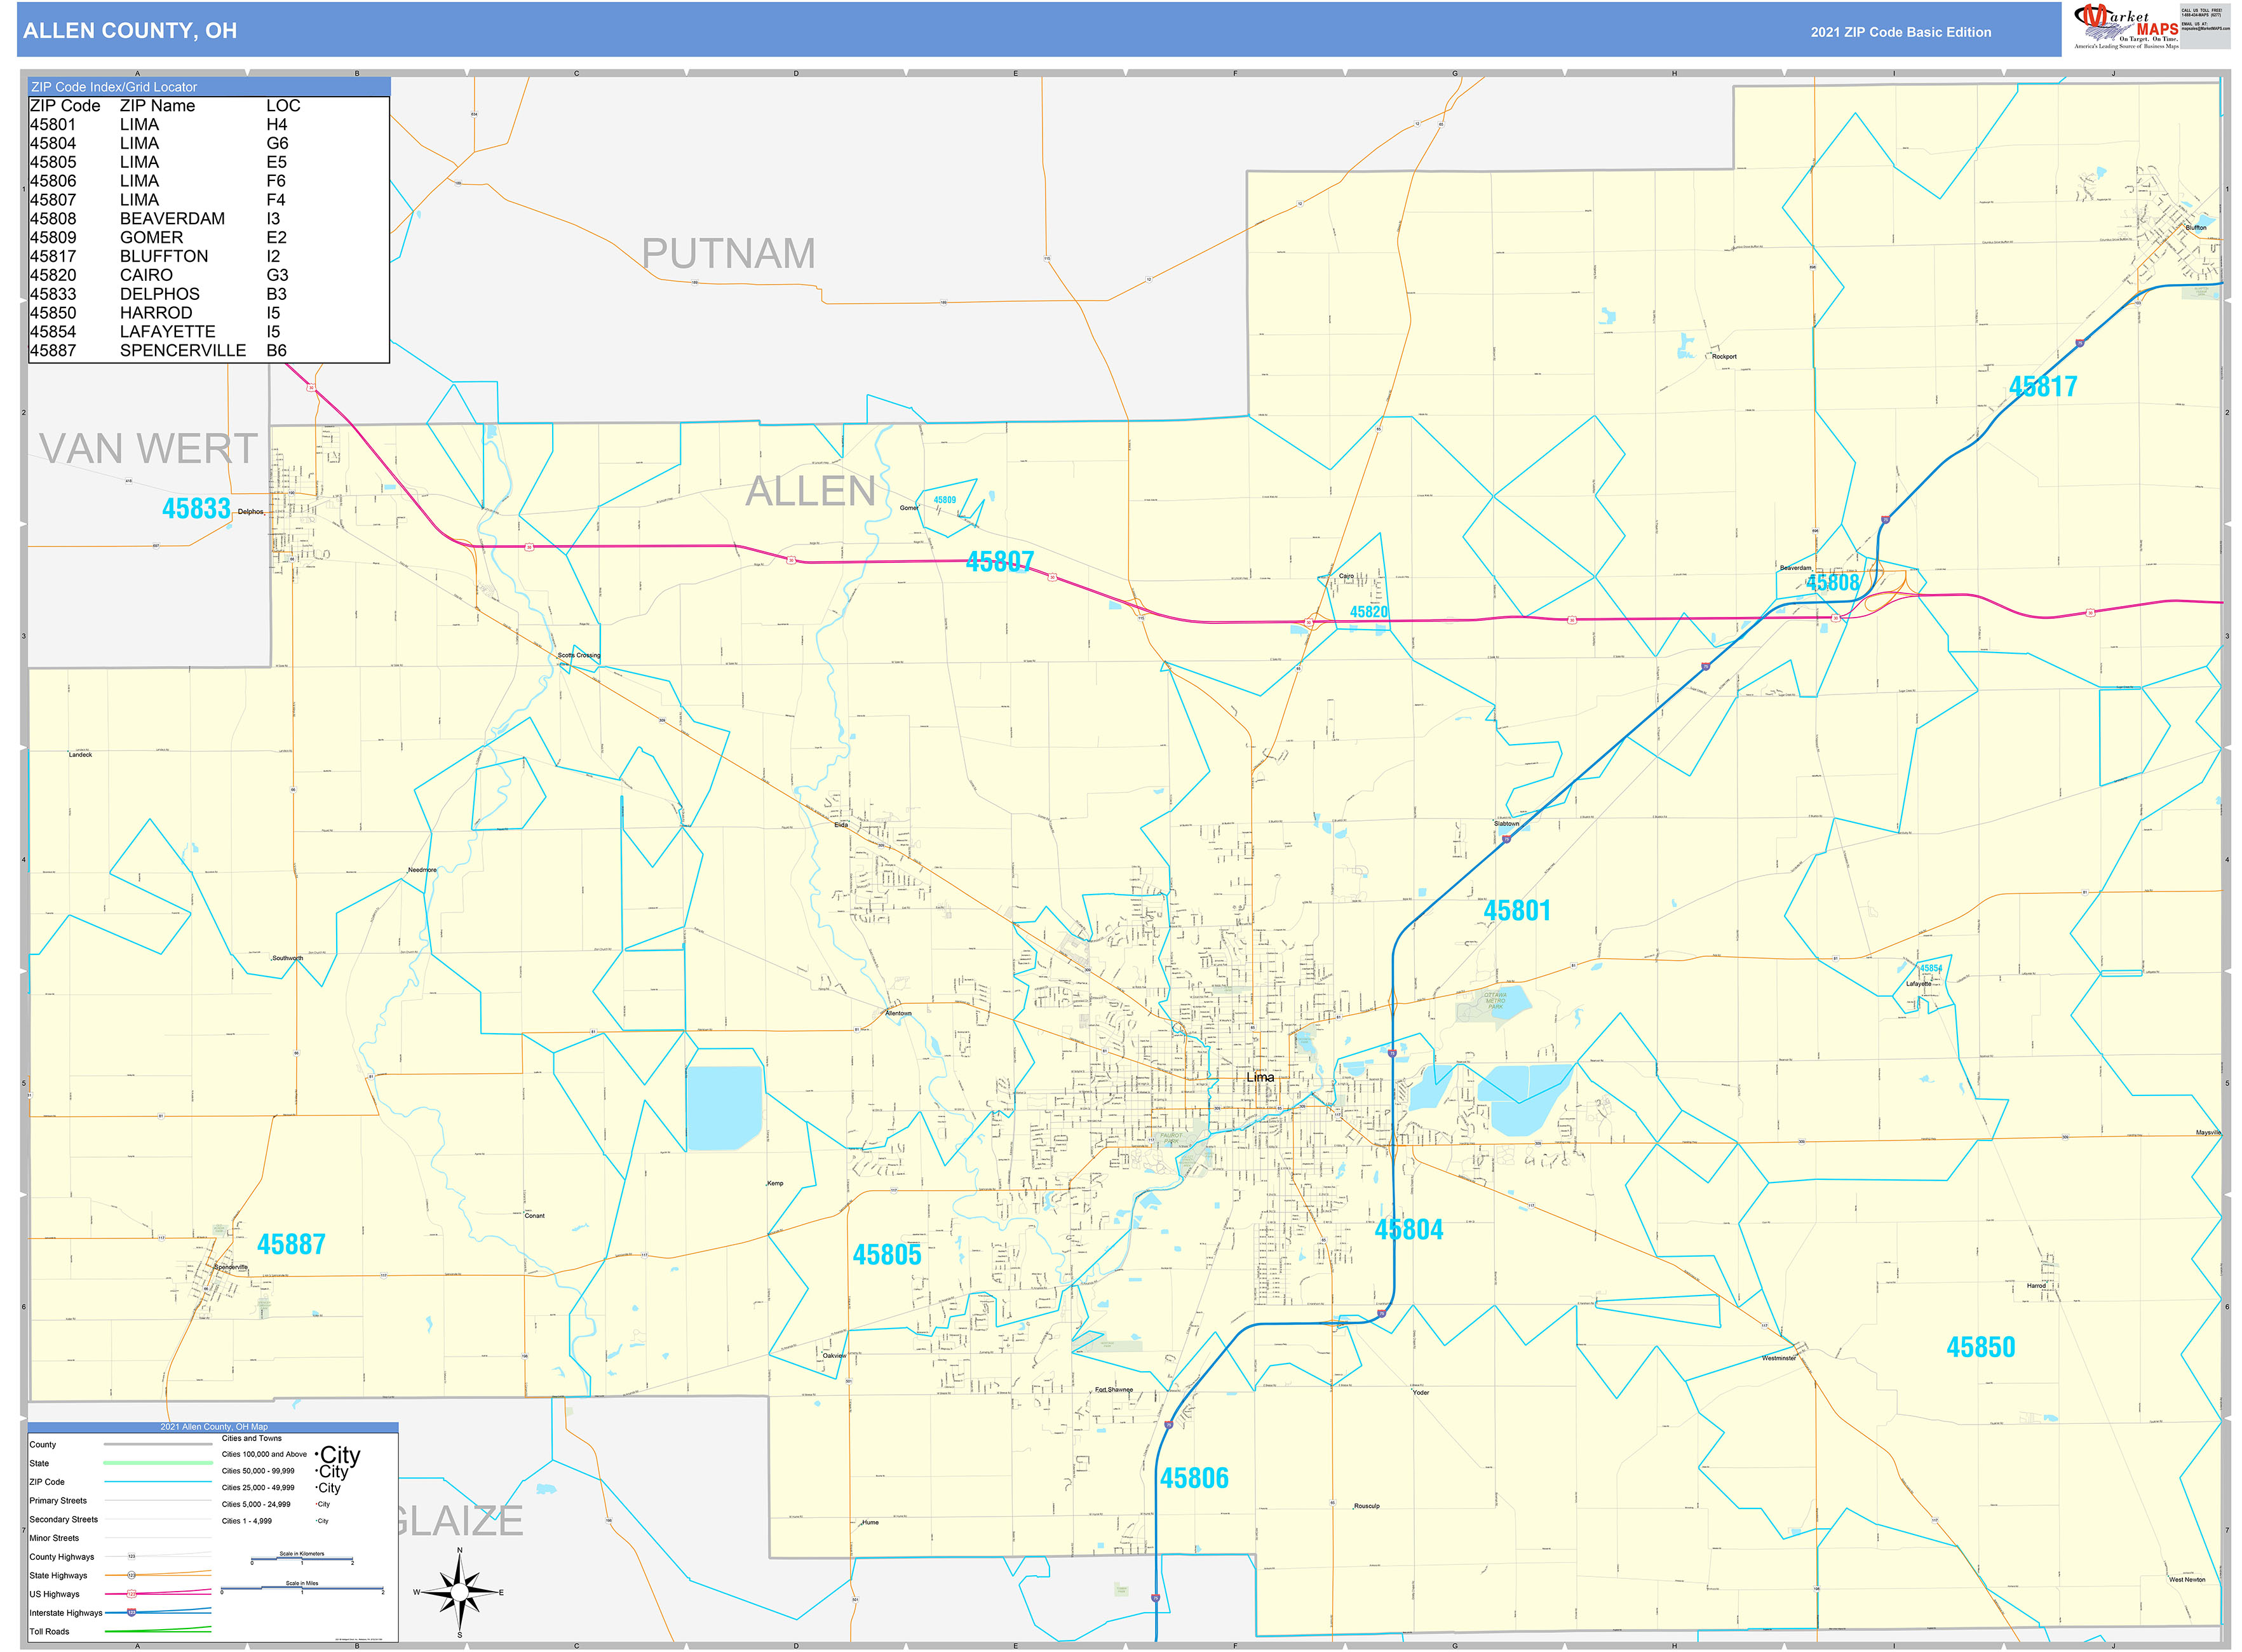 Allen County, OH Zip Code Wall Map Basic Style by MarketMAPS MapSales